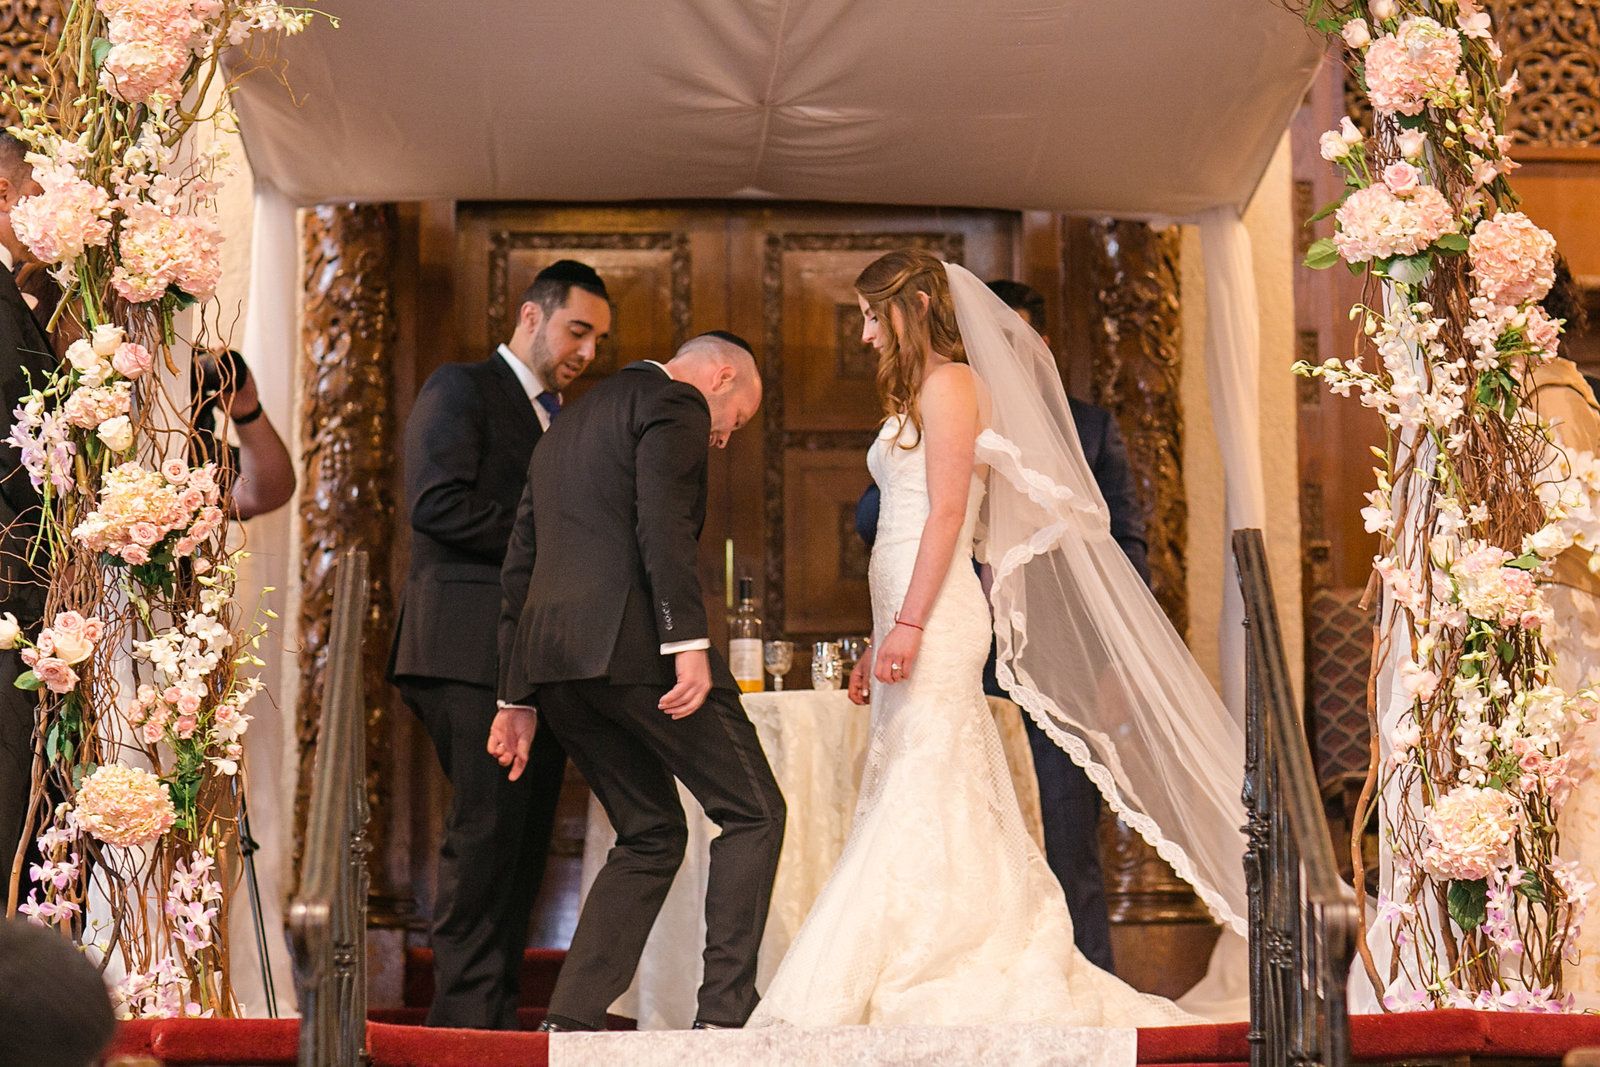 Breaking of the glass during a jewish wedding